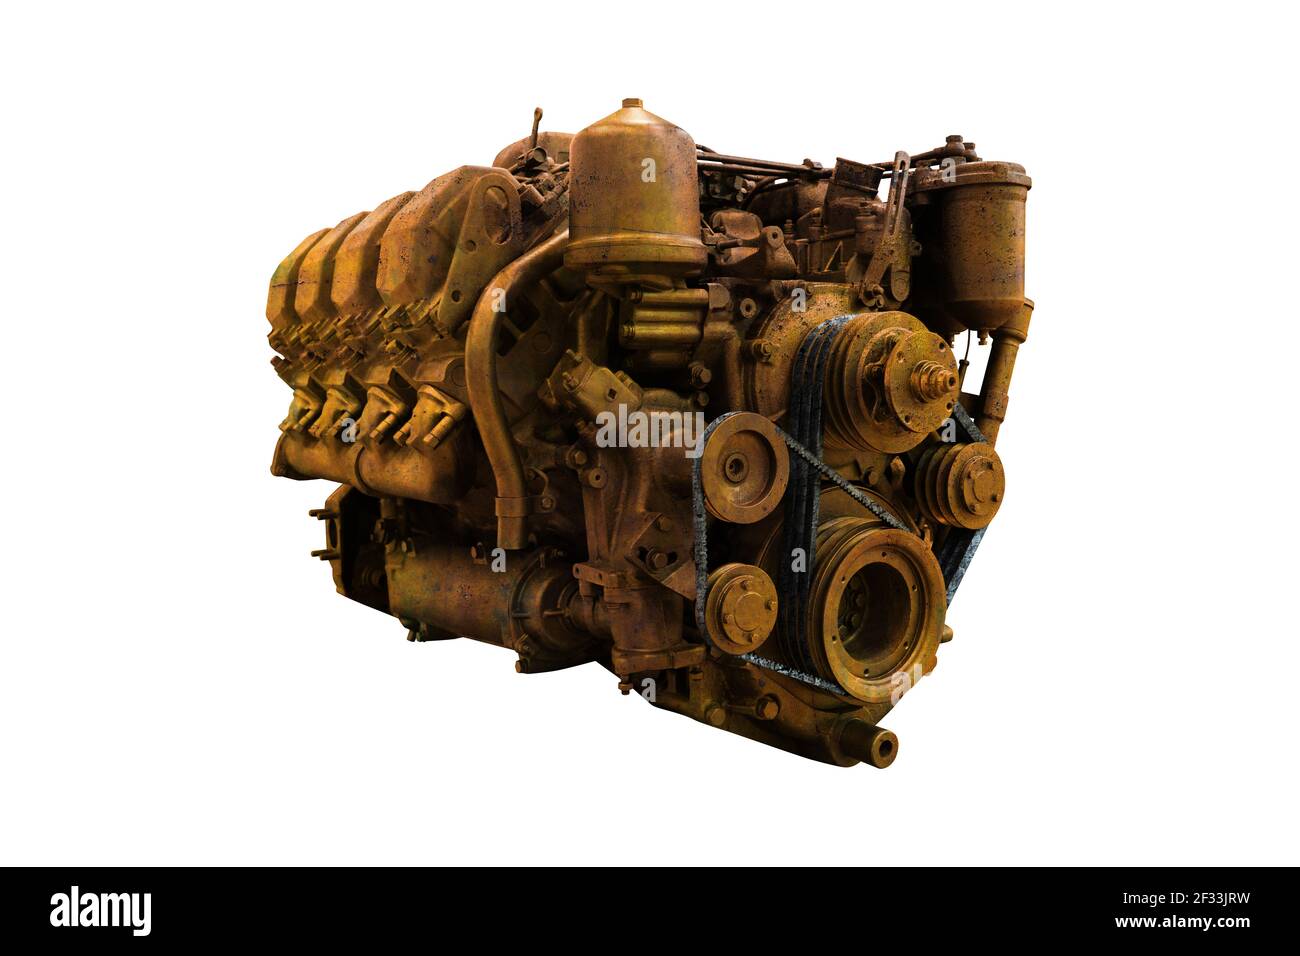 Old rusty diesel engine isolated on white background Stock Photo